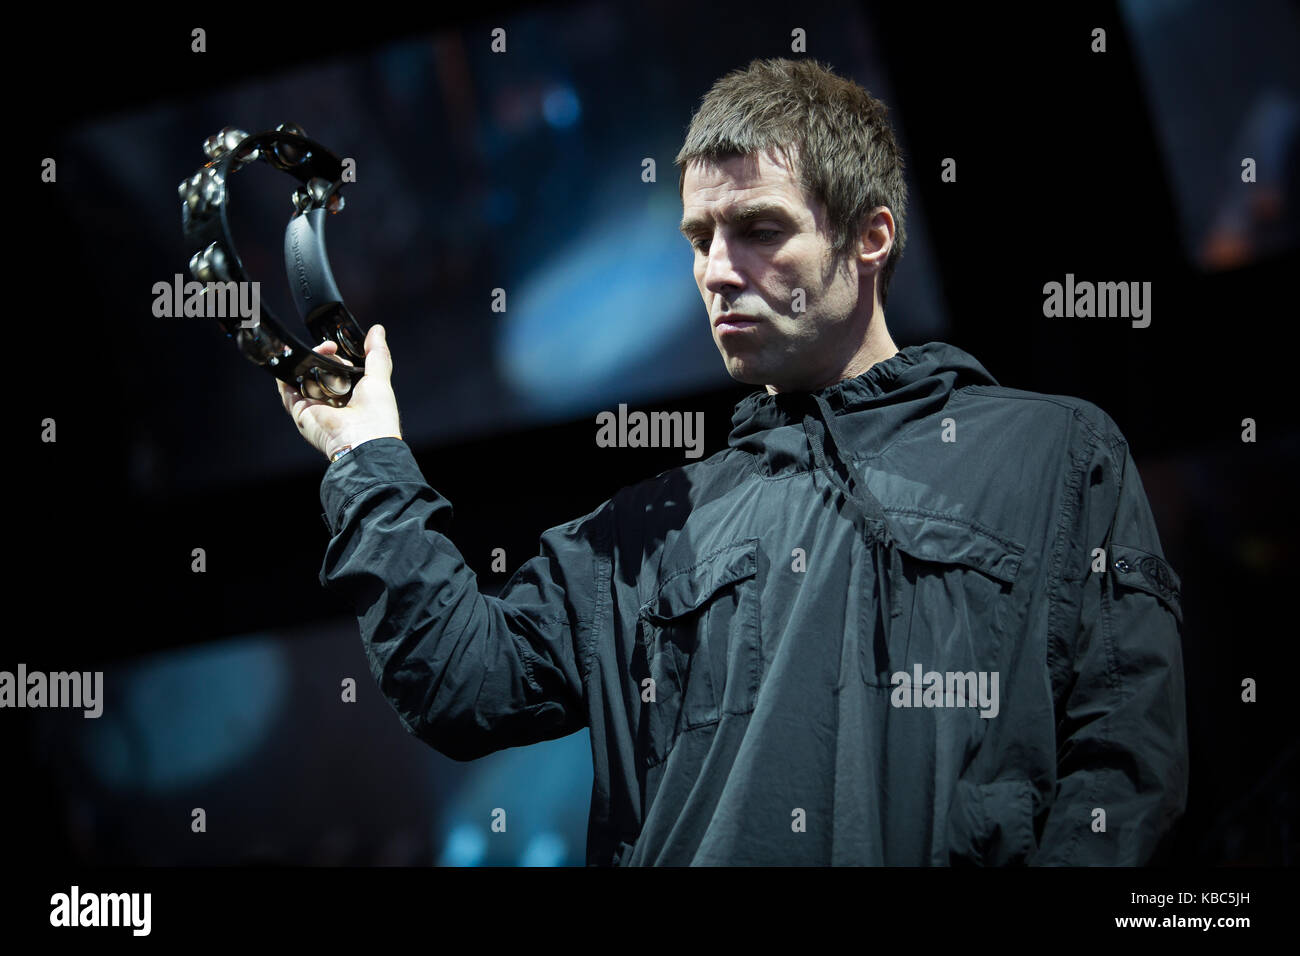 The English singer, songwriter and musician Liam Gallagher performs a live concert during the Norwegian music festival Bergenfest 2017 in Bergen. Liam Gallagher is known as the lead vocalist of the English rock band Oasis. Norway, 14/06 2017. Stock Photo